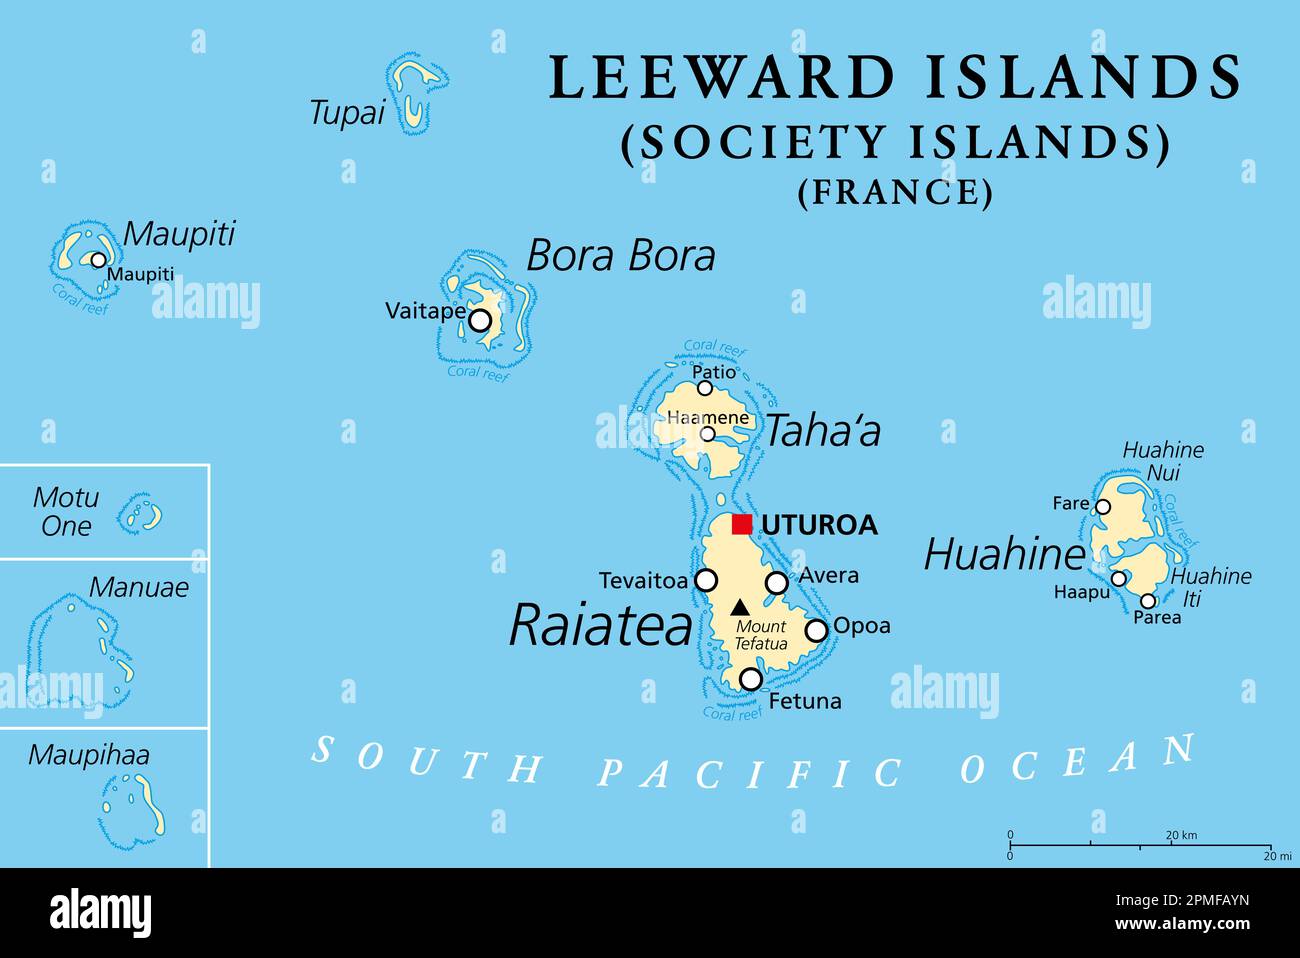 Leeward Islands Political Map Western Part Of The Society Islands In French Polynesia An Overseas Collectivity Of France In The South Pacific 2PMFAYN 